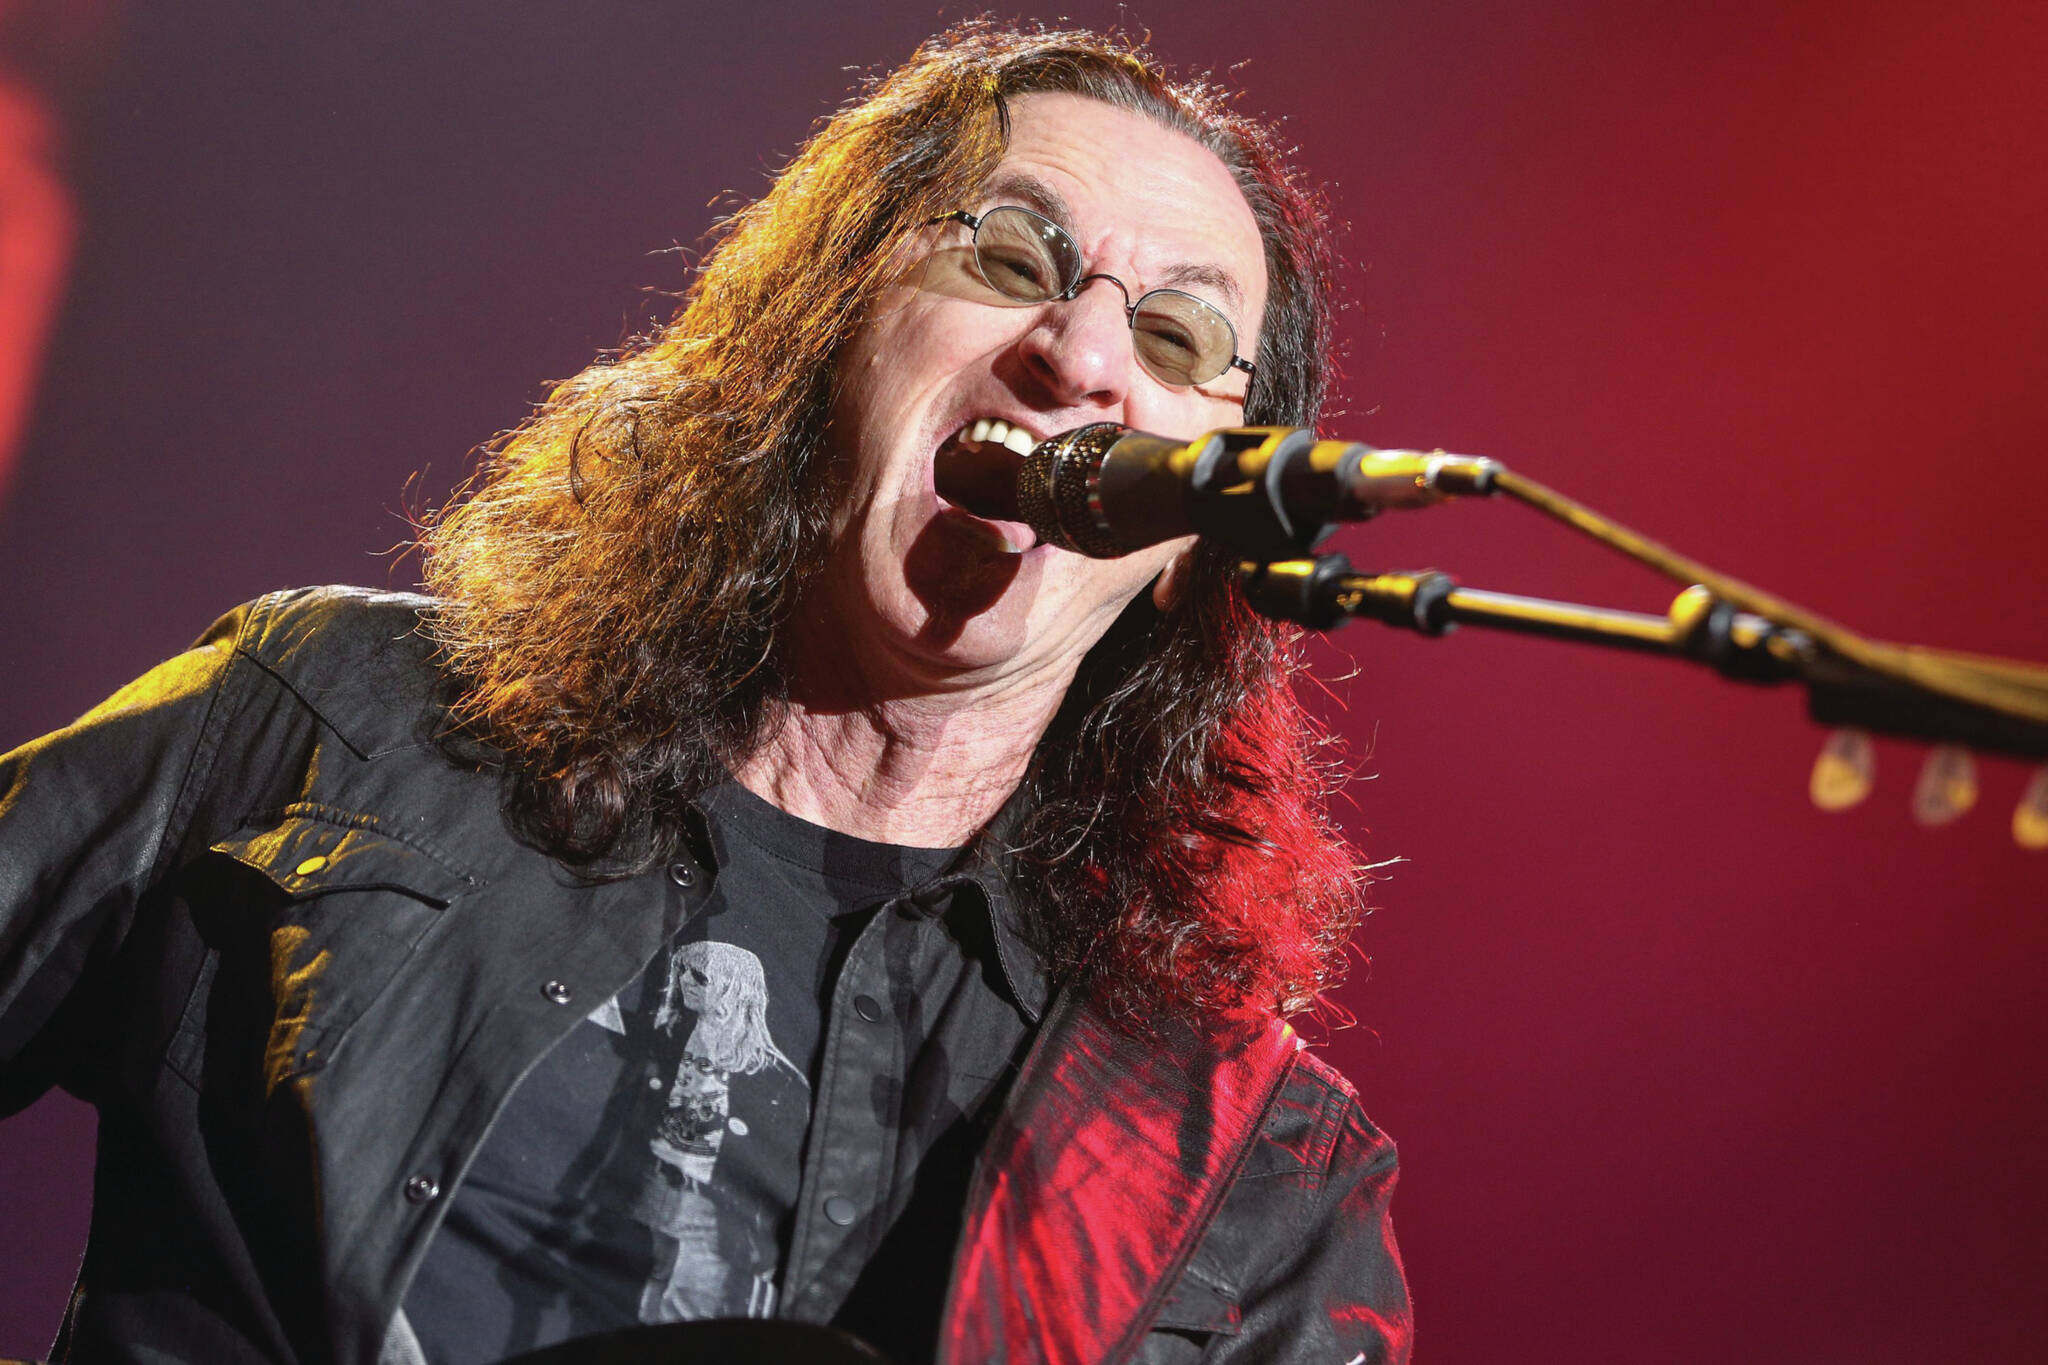 Geddy Lee’s memoir, “My Effin’ Life,” is an engrossing tale of a “classic underachiever” who became a Rock & Roll Hall of Fame vocalist, bassist, and keyboard player. It’s a great read for anyone interested in the brilliant prog-rock trio or the music scene from the 1970s onward. (File photo by The Associated Press)